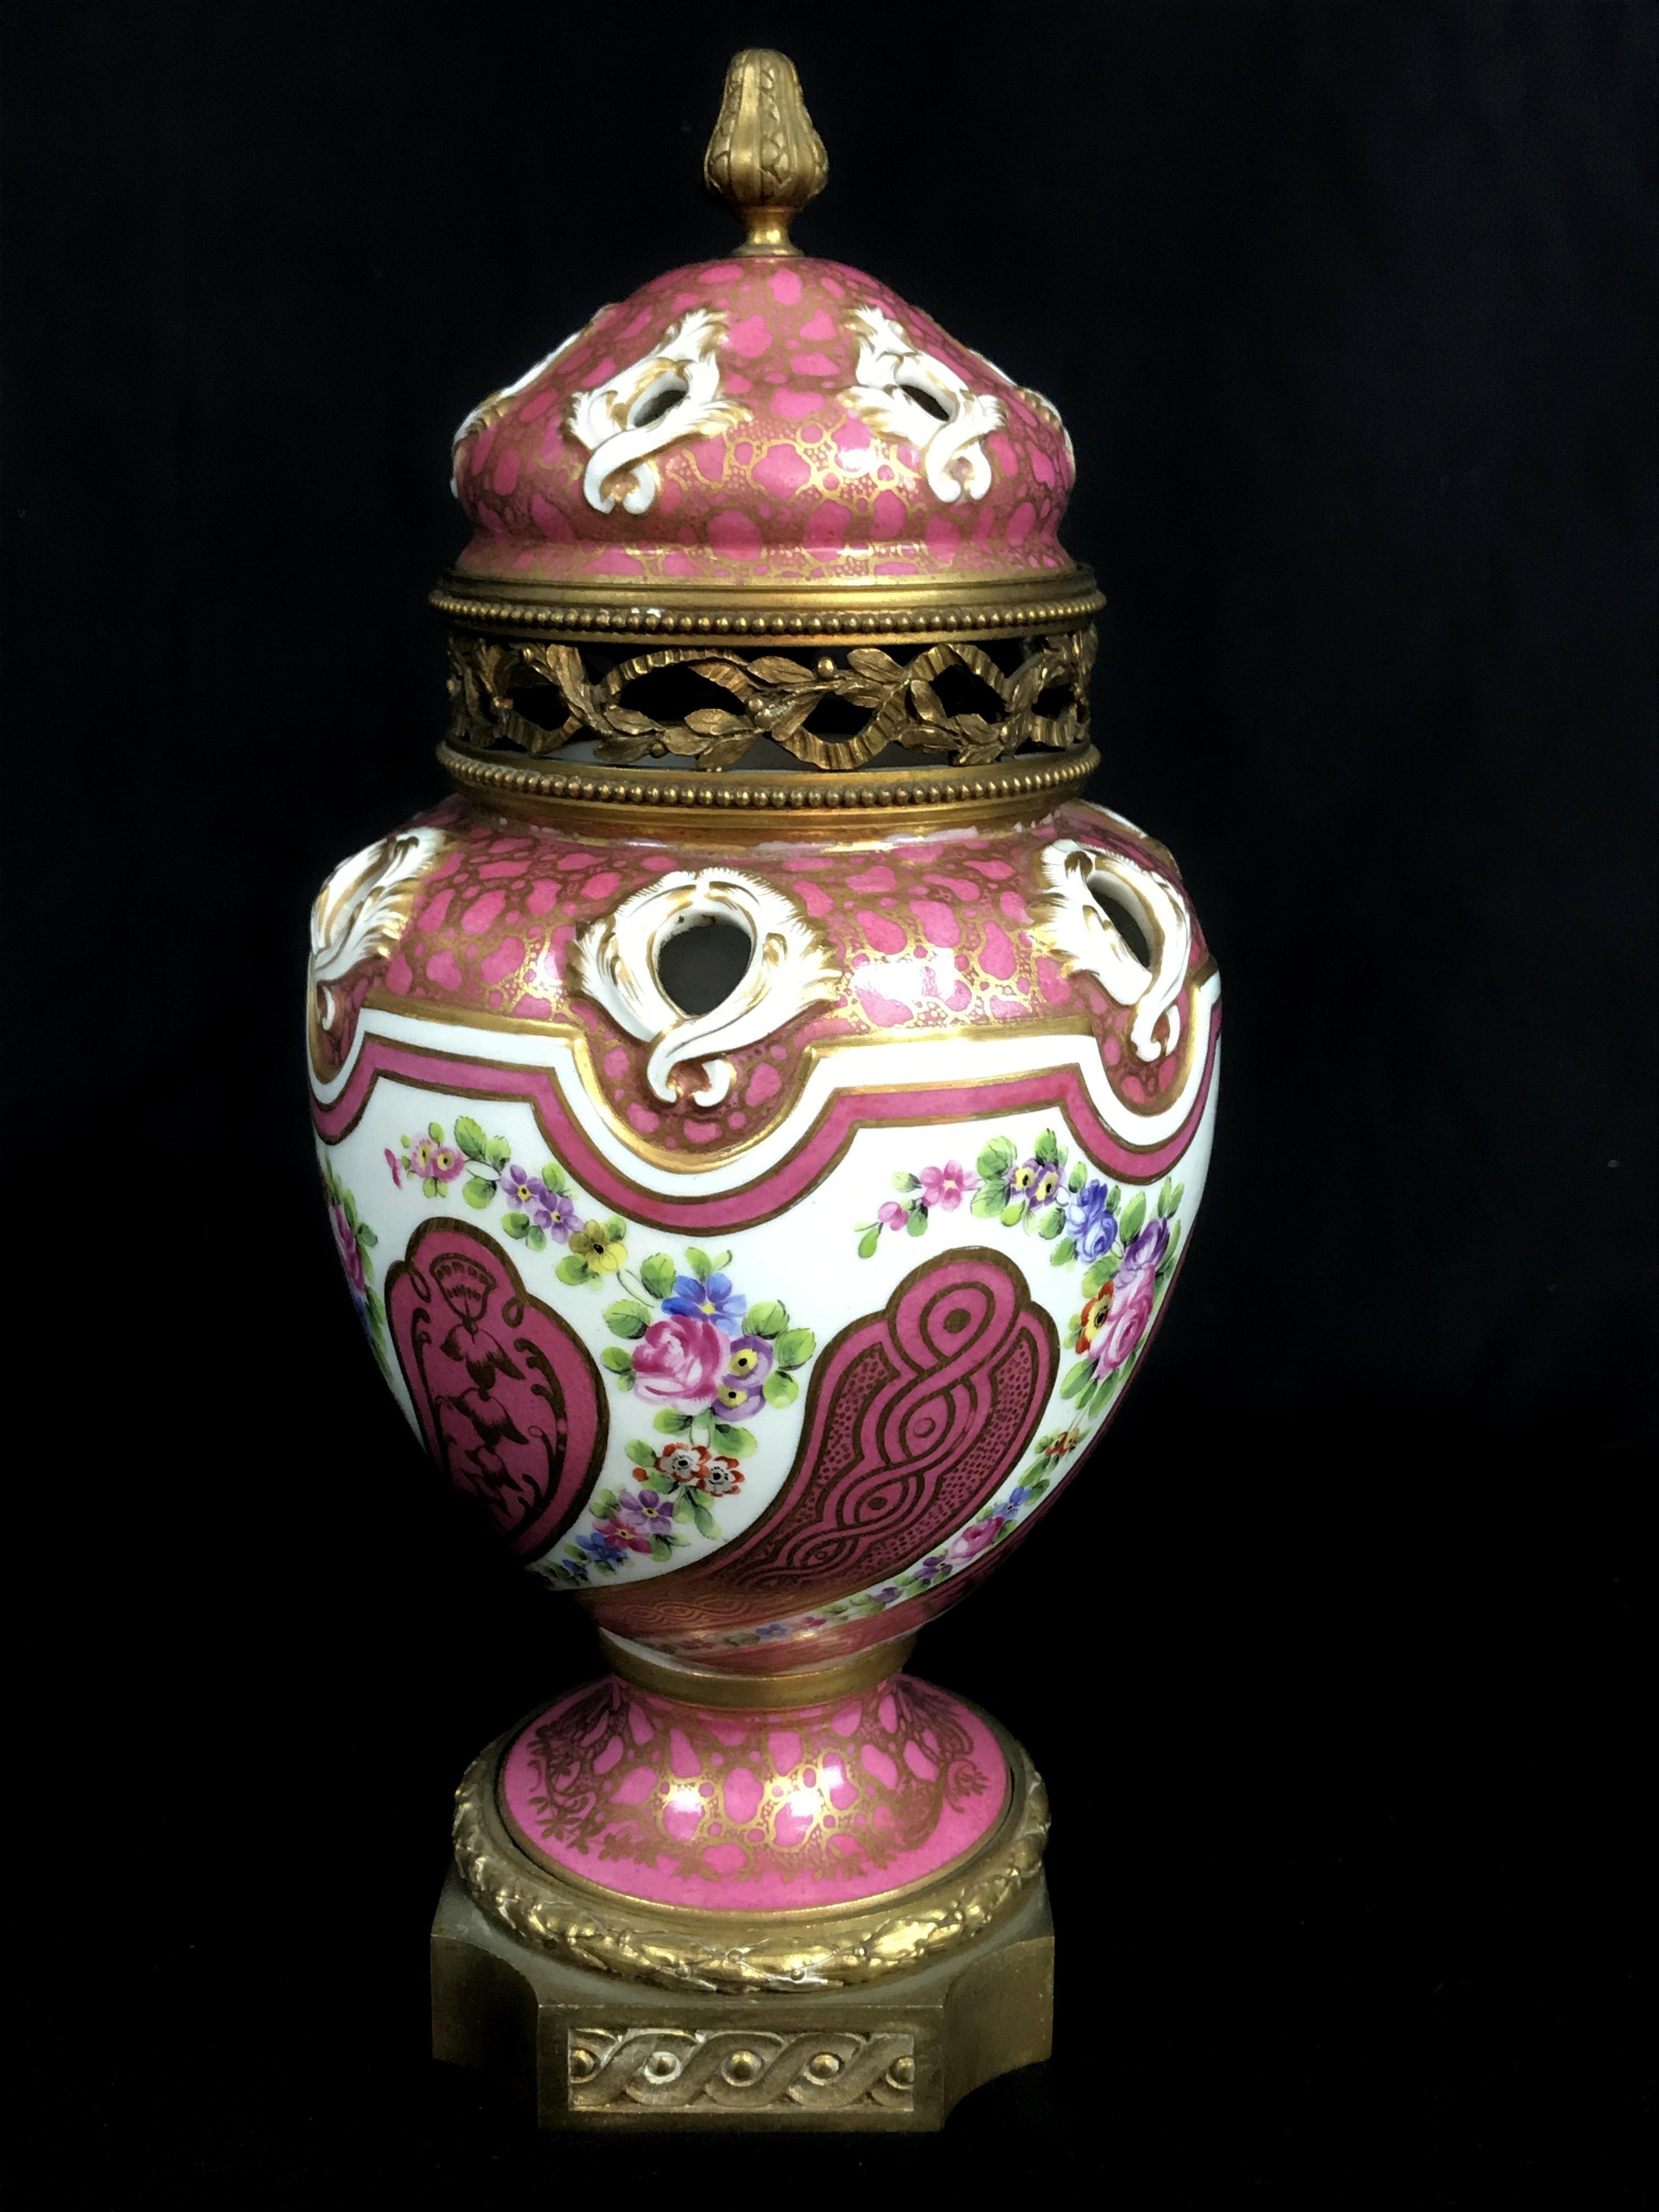 Refined polychrome porcelain perfume burner, in the shape of potiche, painted with refined geometric decorations in gold on a light magenta red background and splendid bouquet of flowers. The base and the band of the perforated lid, with foliate